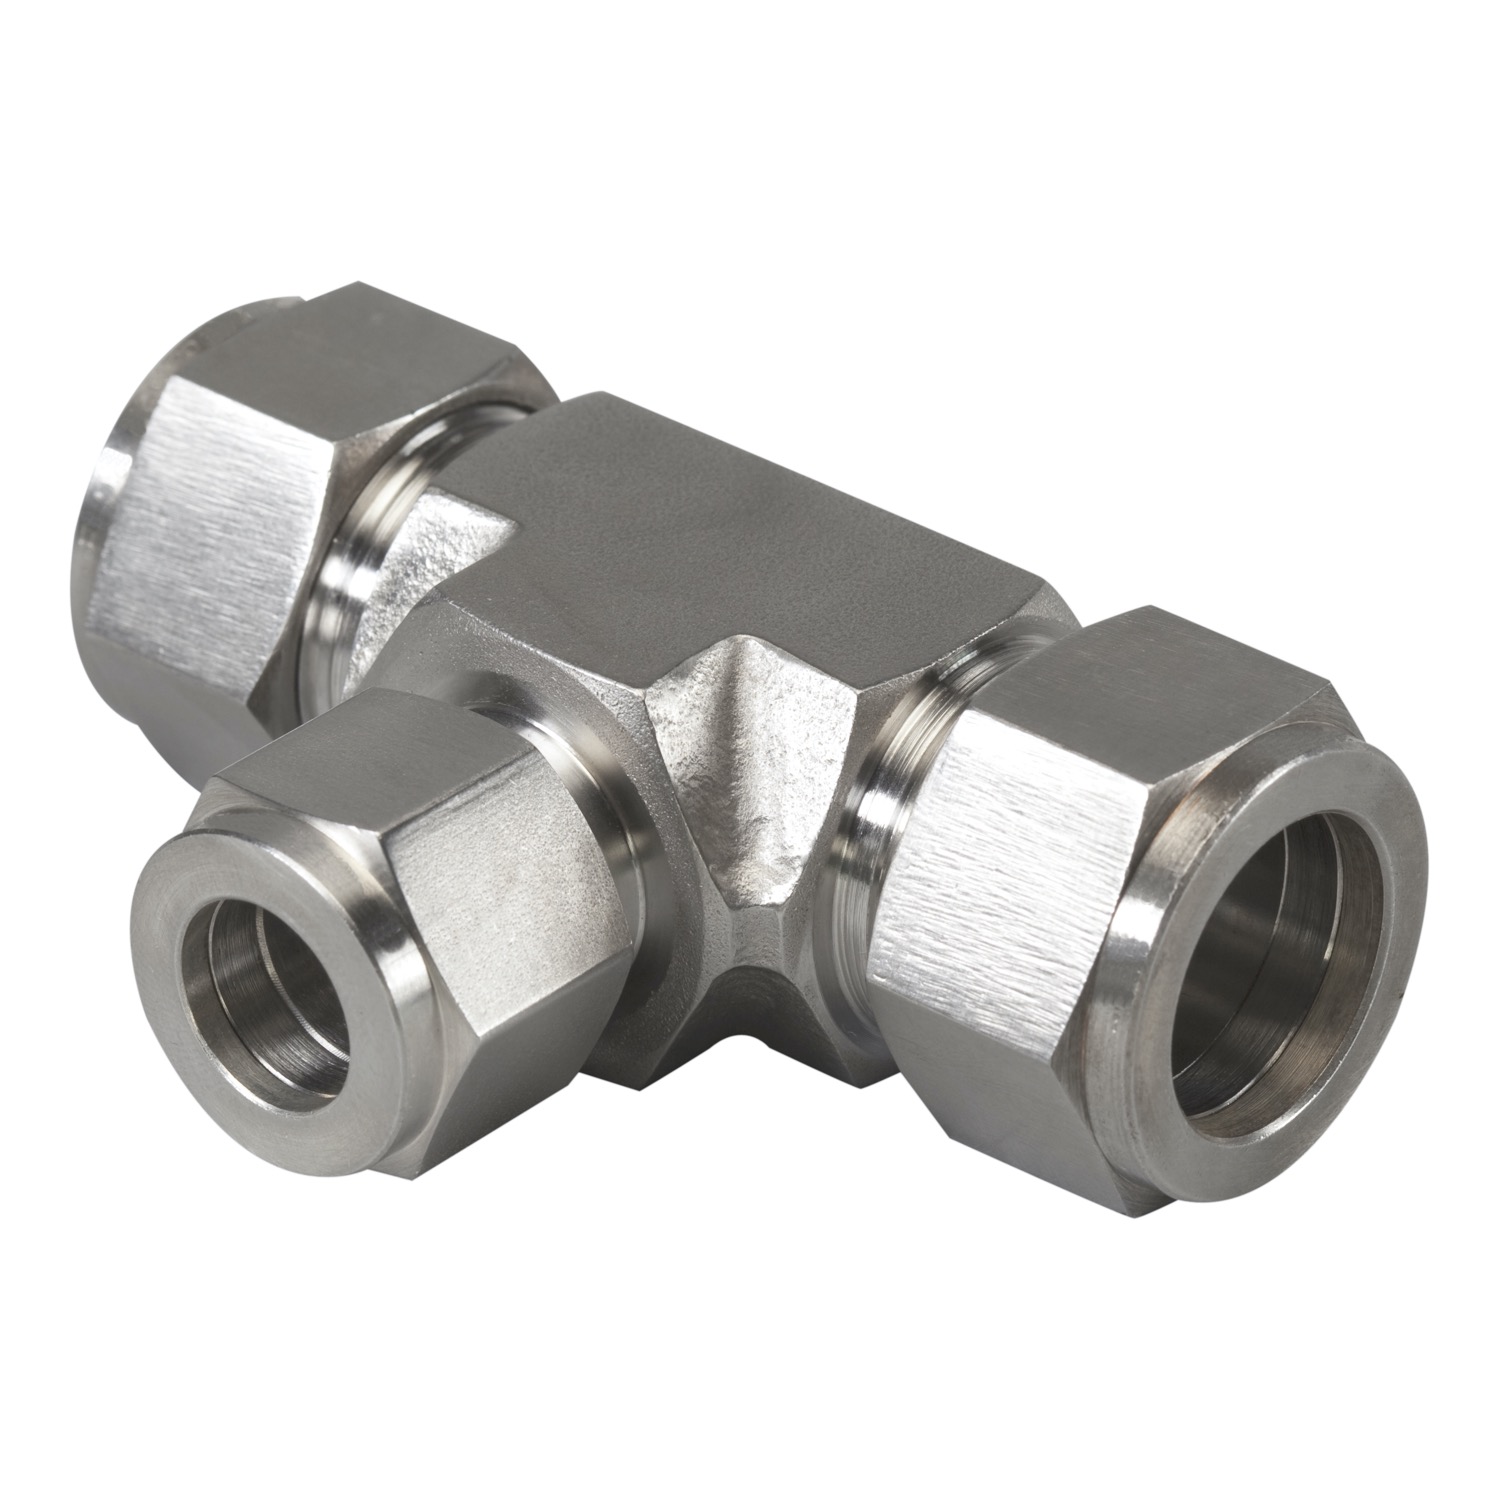 Tees - Union, Compression Fittings, N2603 Series